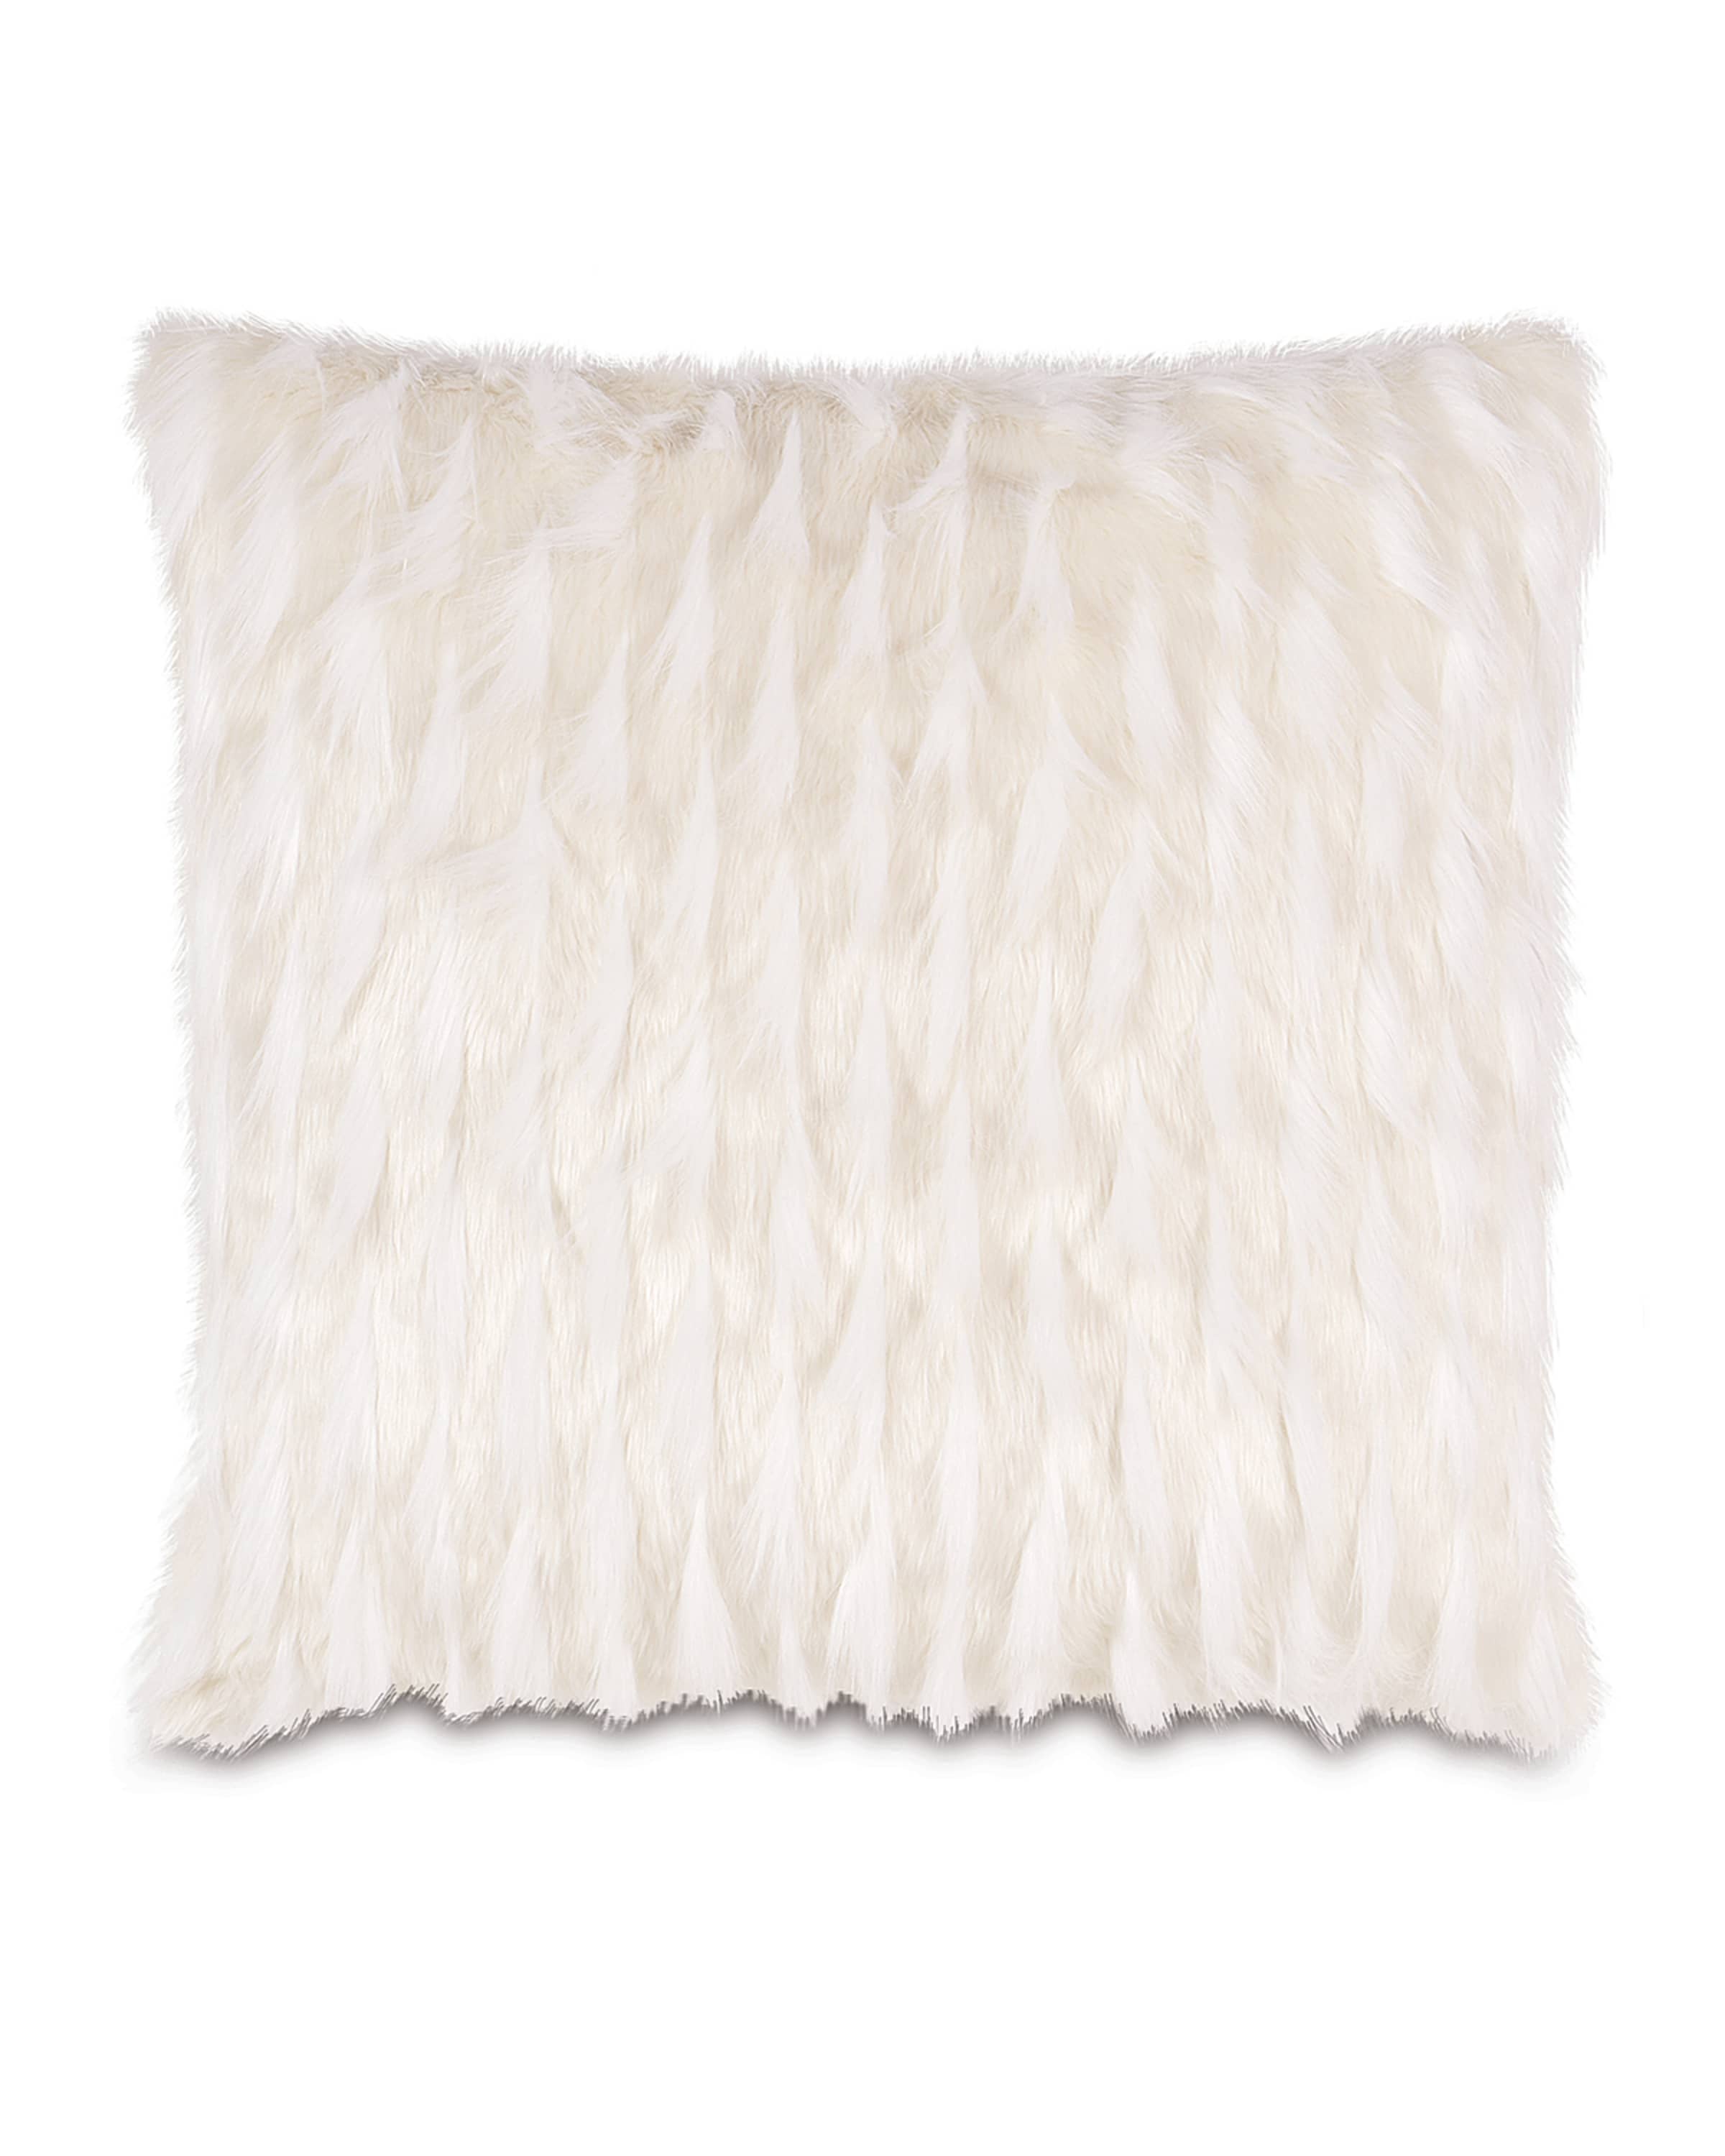 Eastern Accents Halo Decorative Pillow